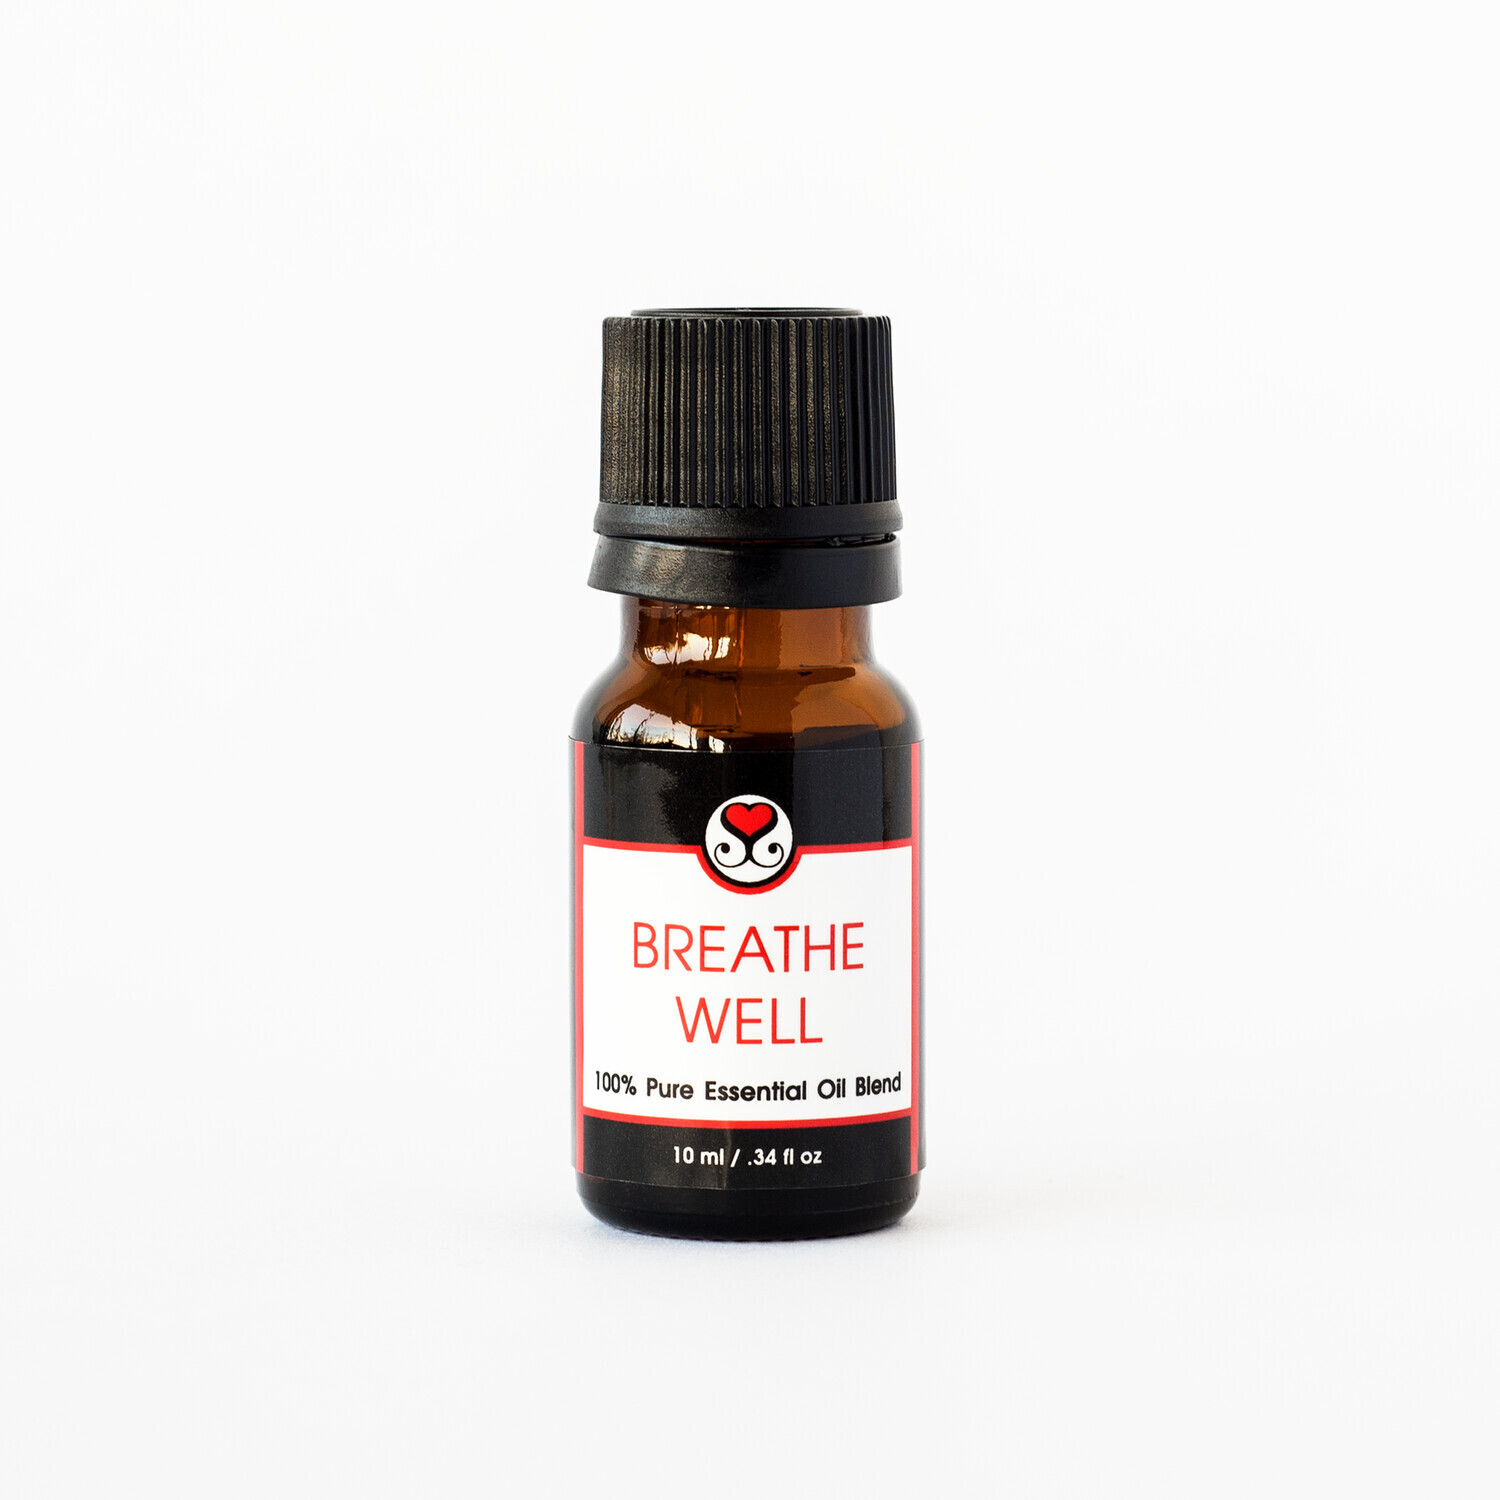 Breathe Well Essential Oil Blend